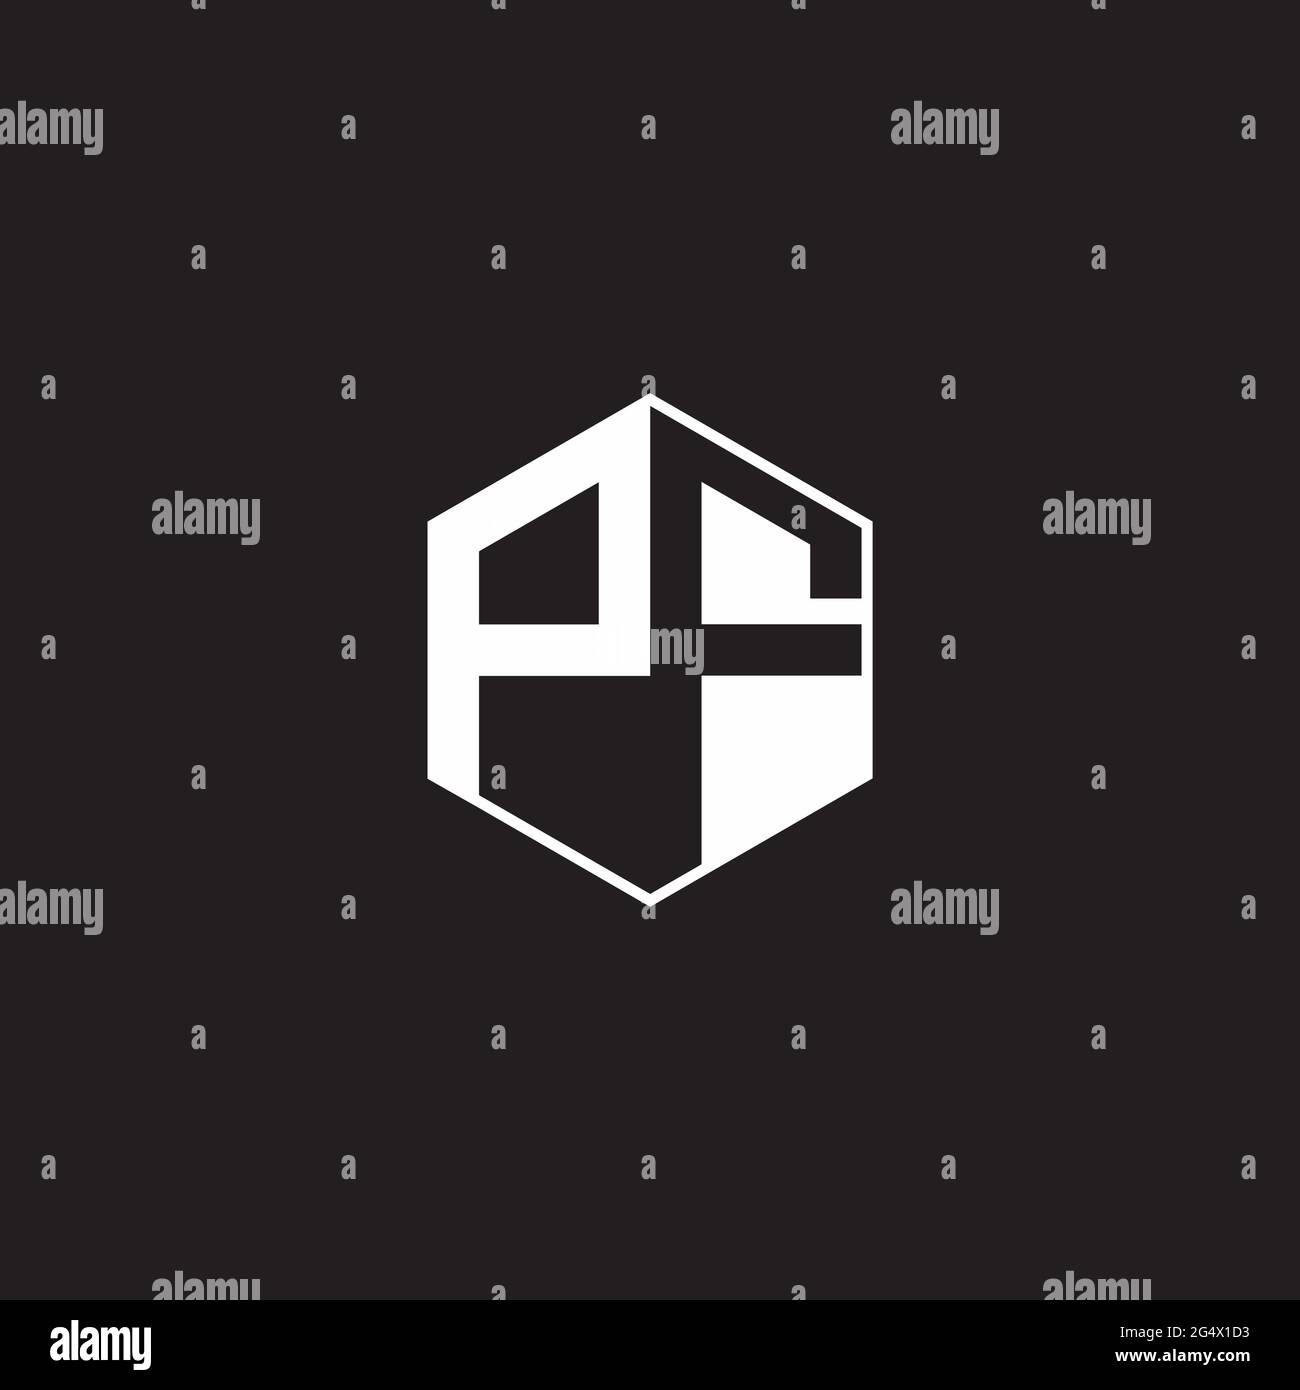 PF P F FP Logo monogram hexagon with black background negative space style Stock Vector